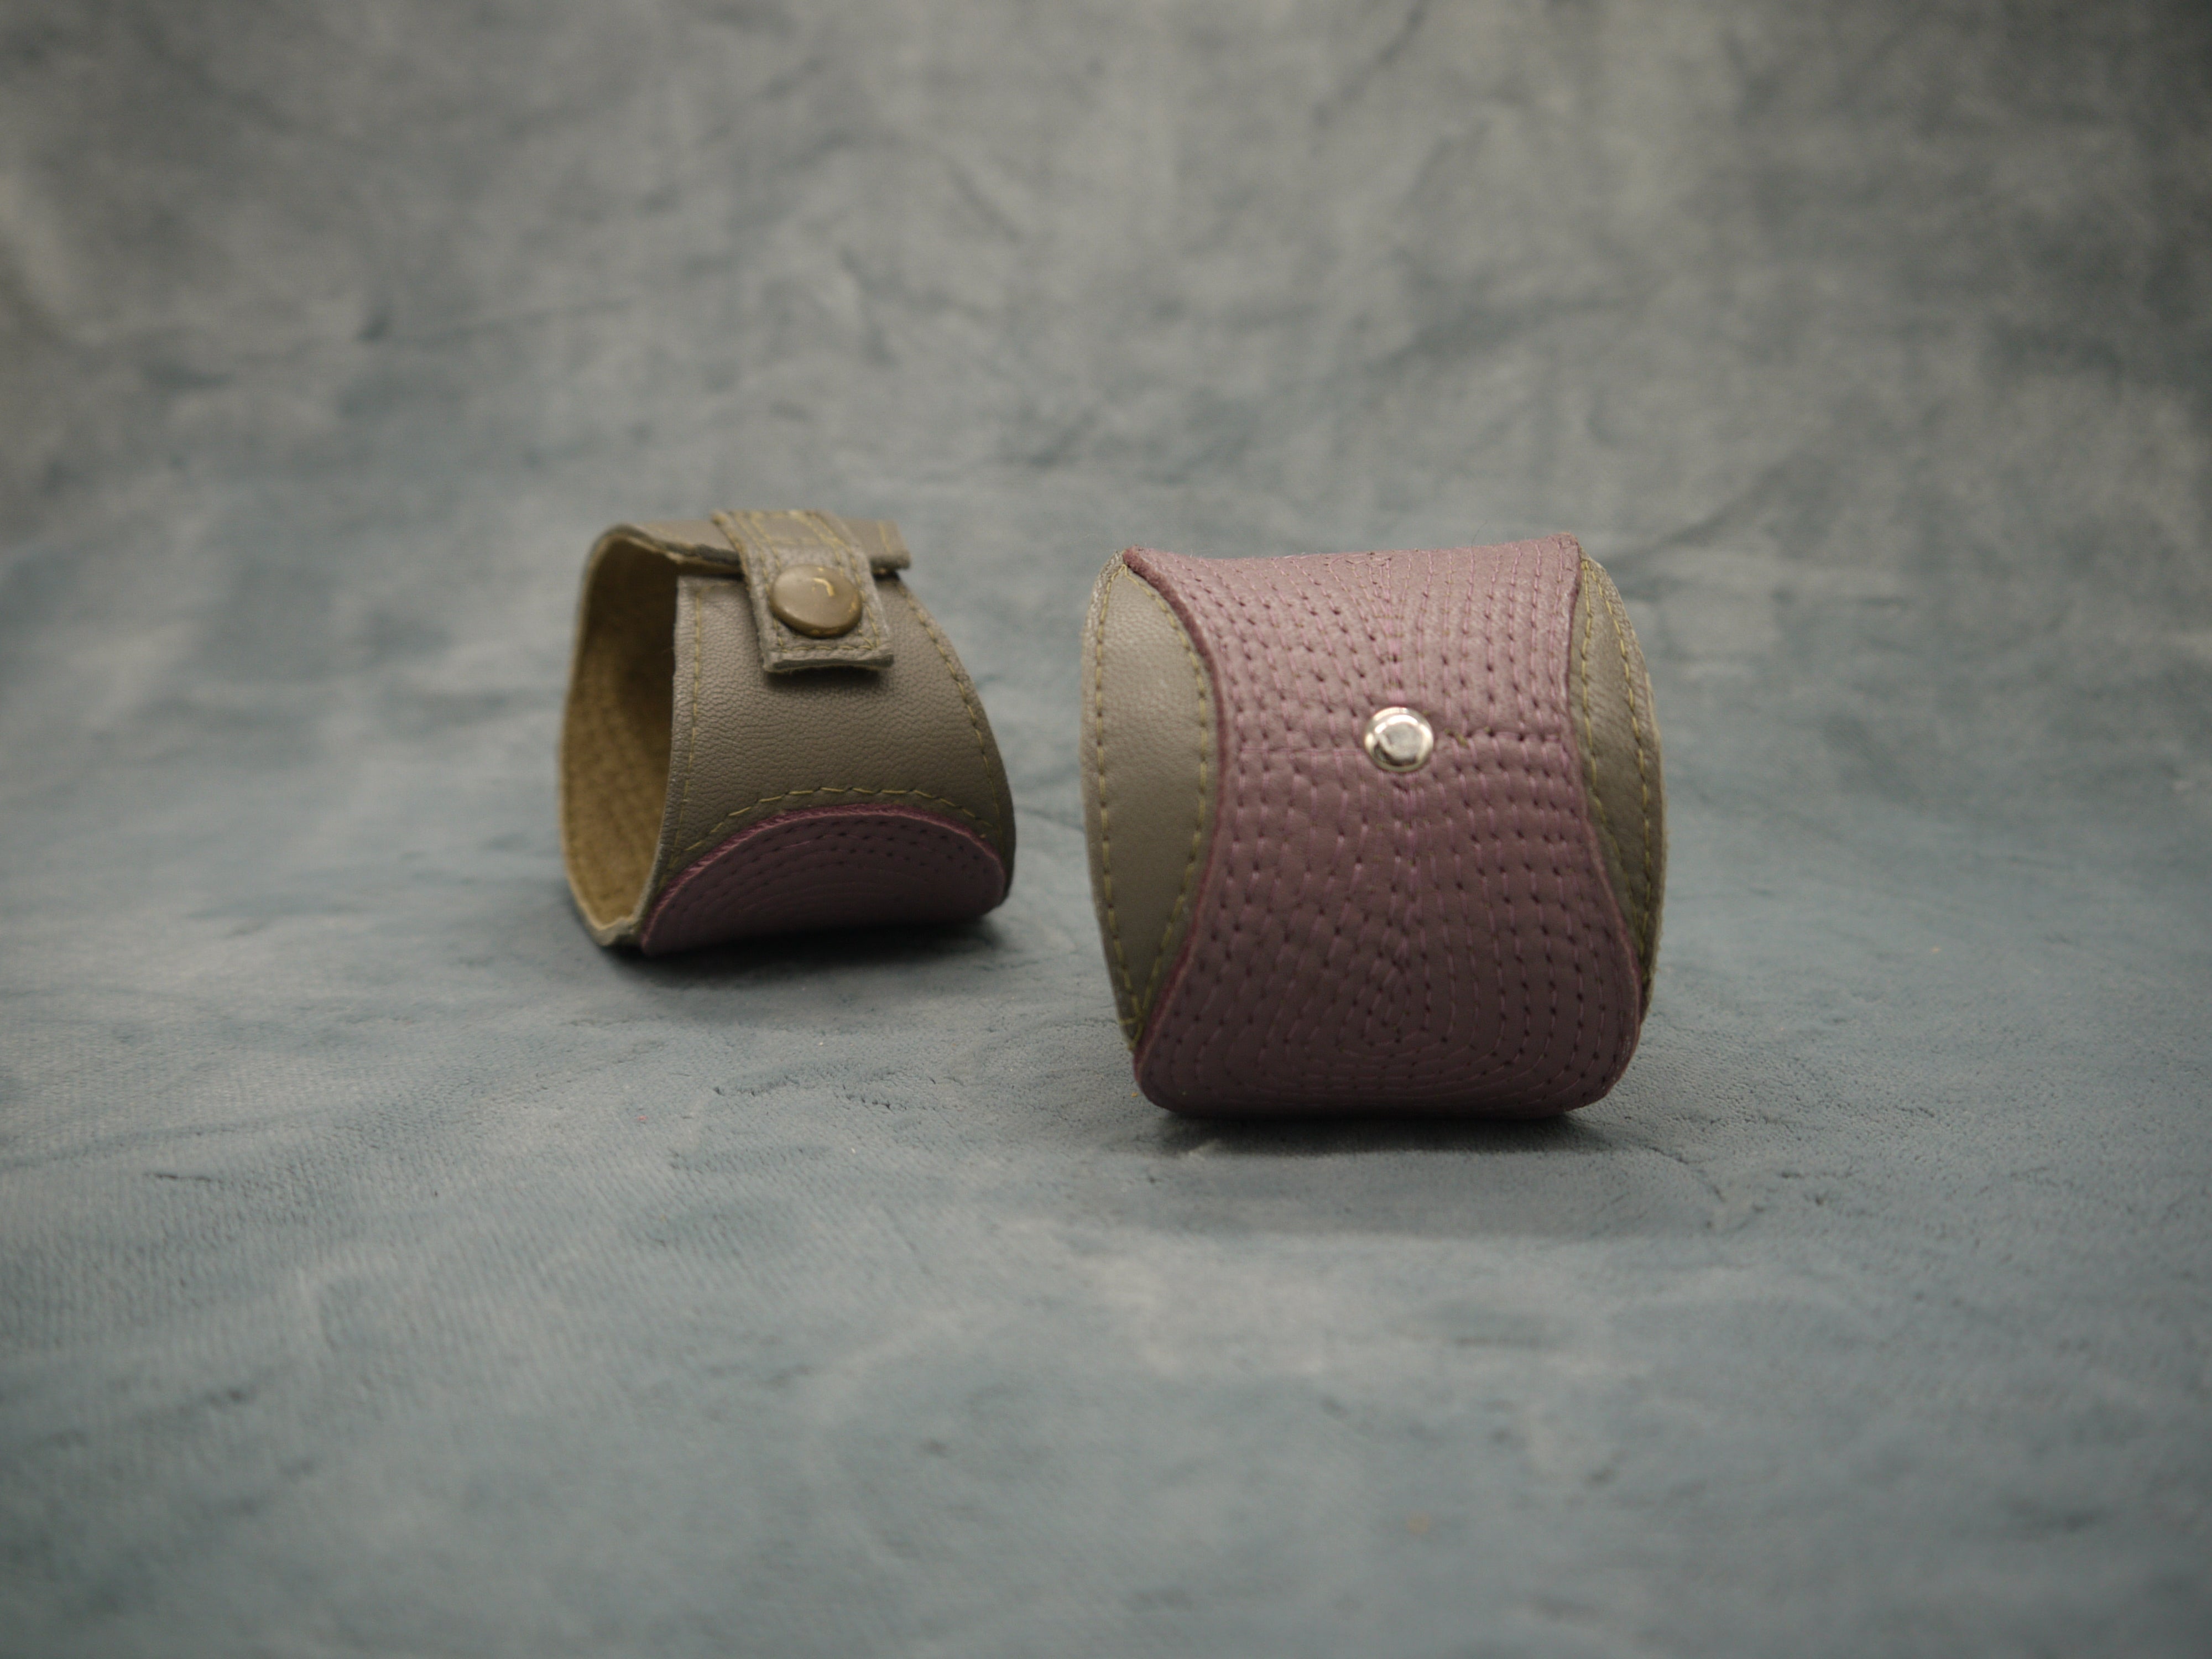 Leather cuff in olive green and smokey lilac. The central smokey lilac lozenge shape section has a concentrical stitching detail.There is a central steel circle as a focal point where the stitching ends. Twi cuffs are shown in the image